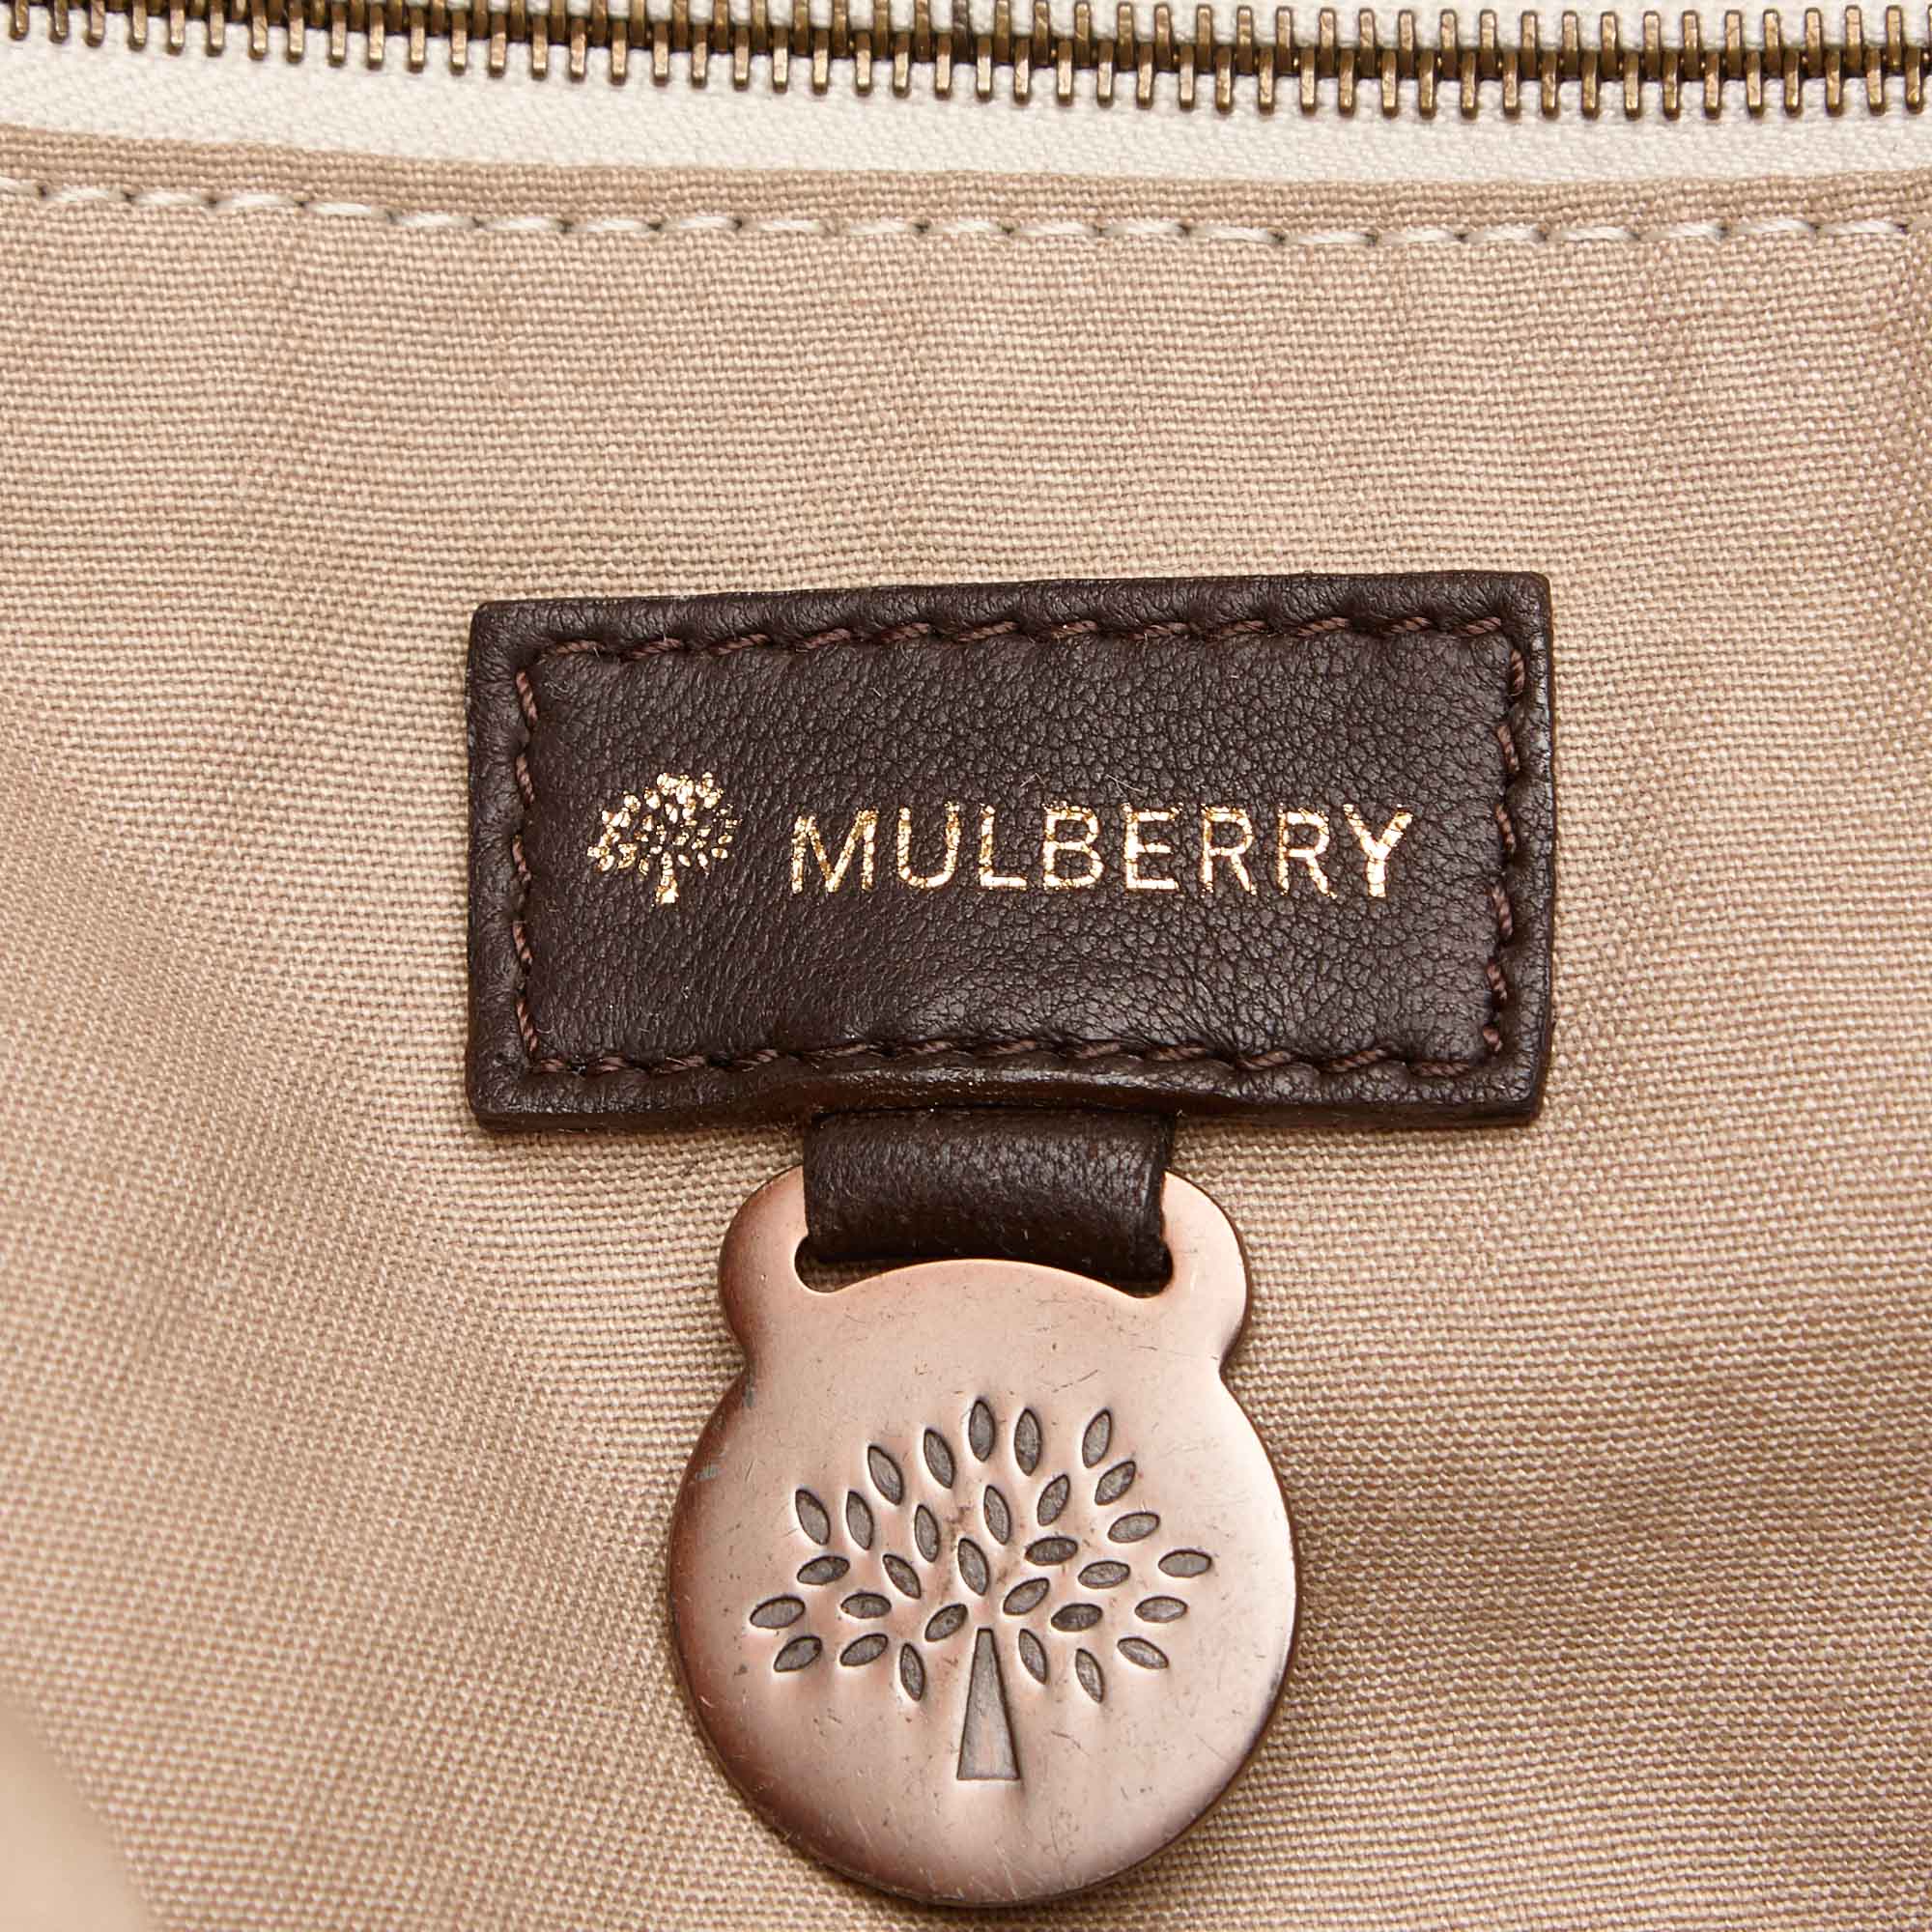 Mulberry - Heritage Leather-Trimmed Logo-Print Canvas Wash Bag Mulberry